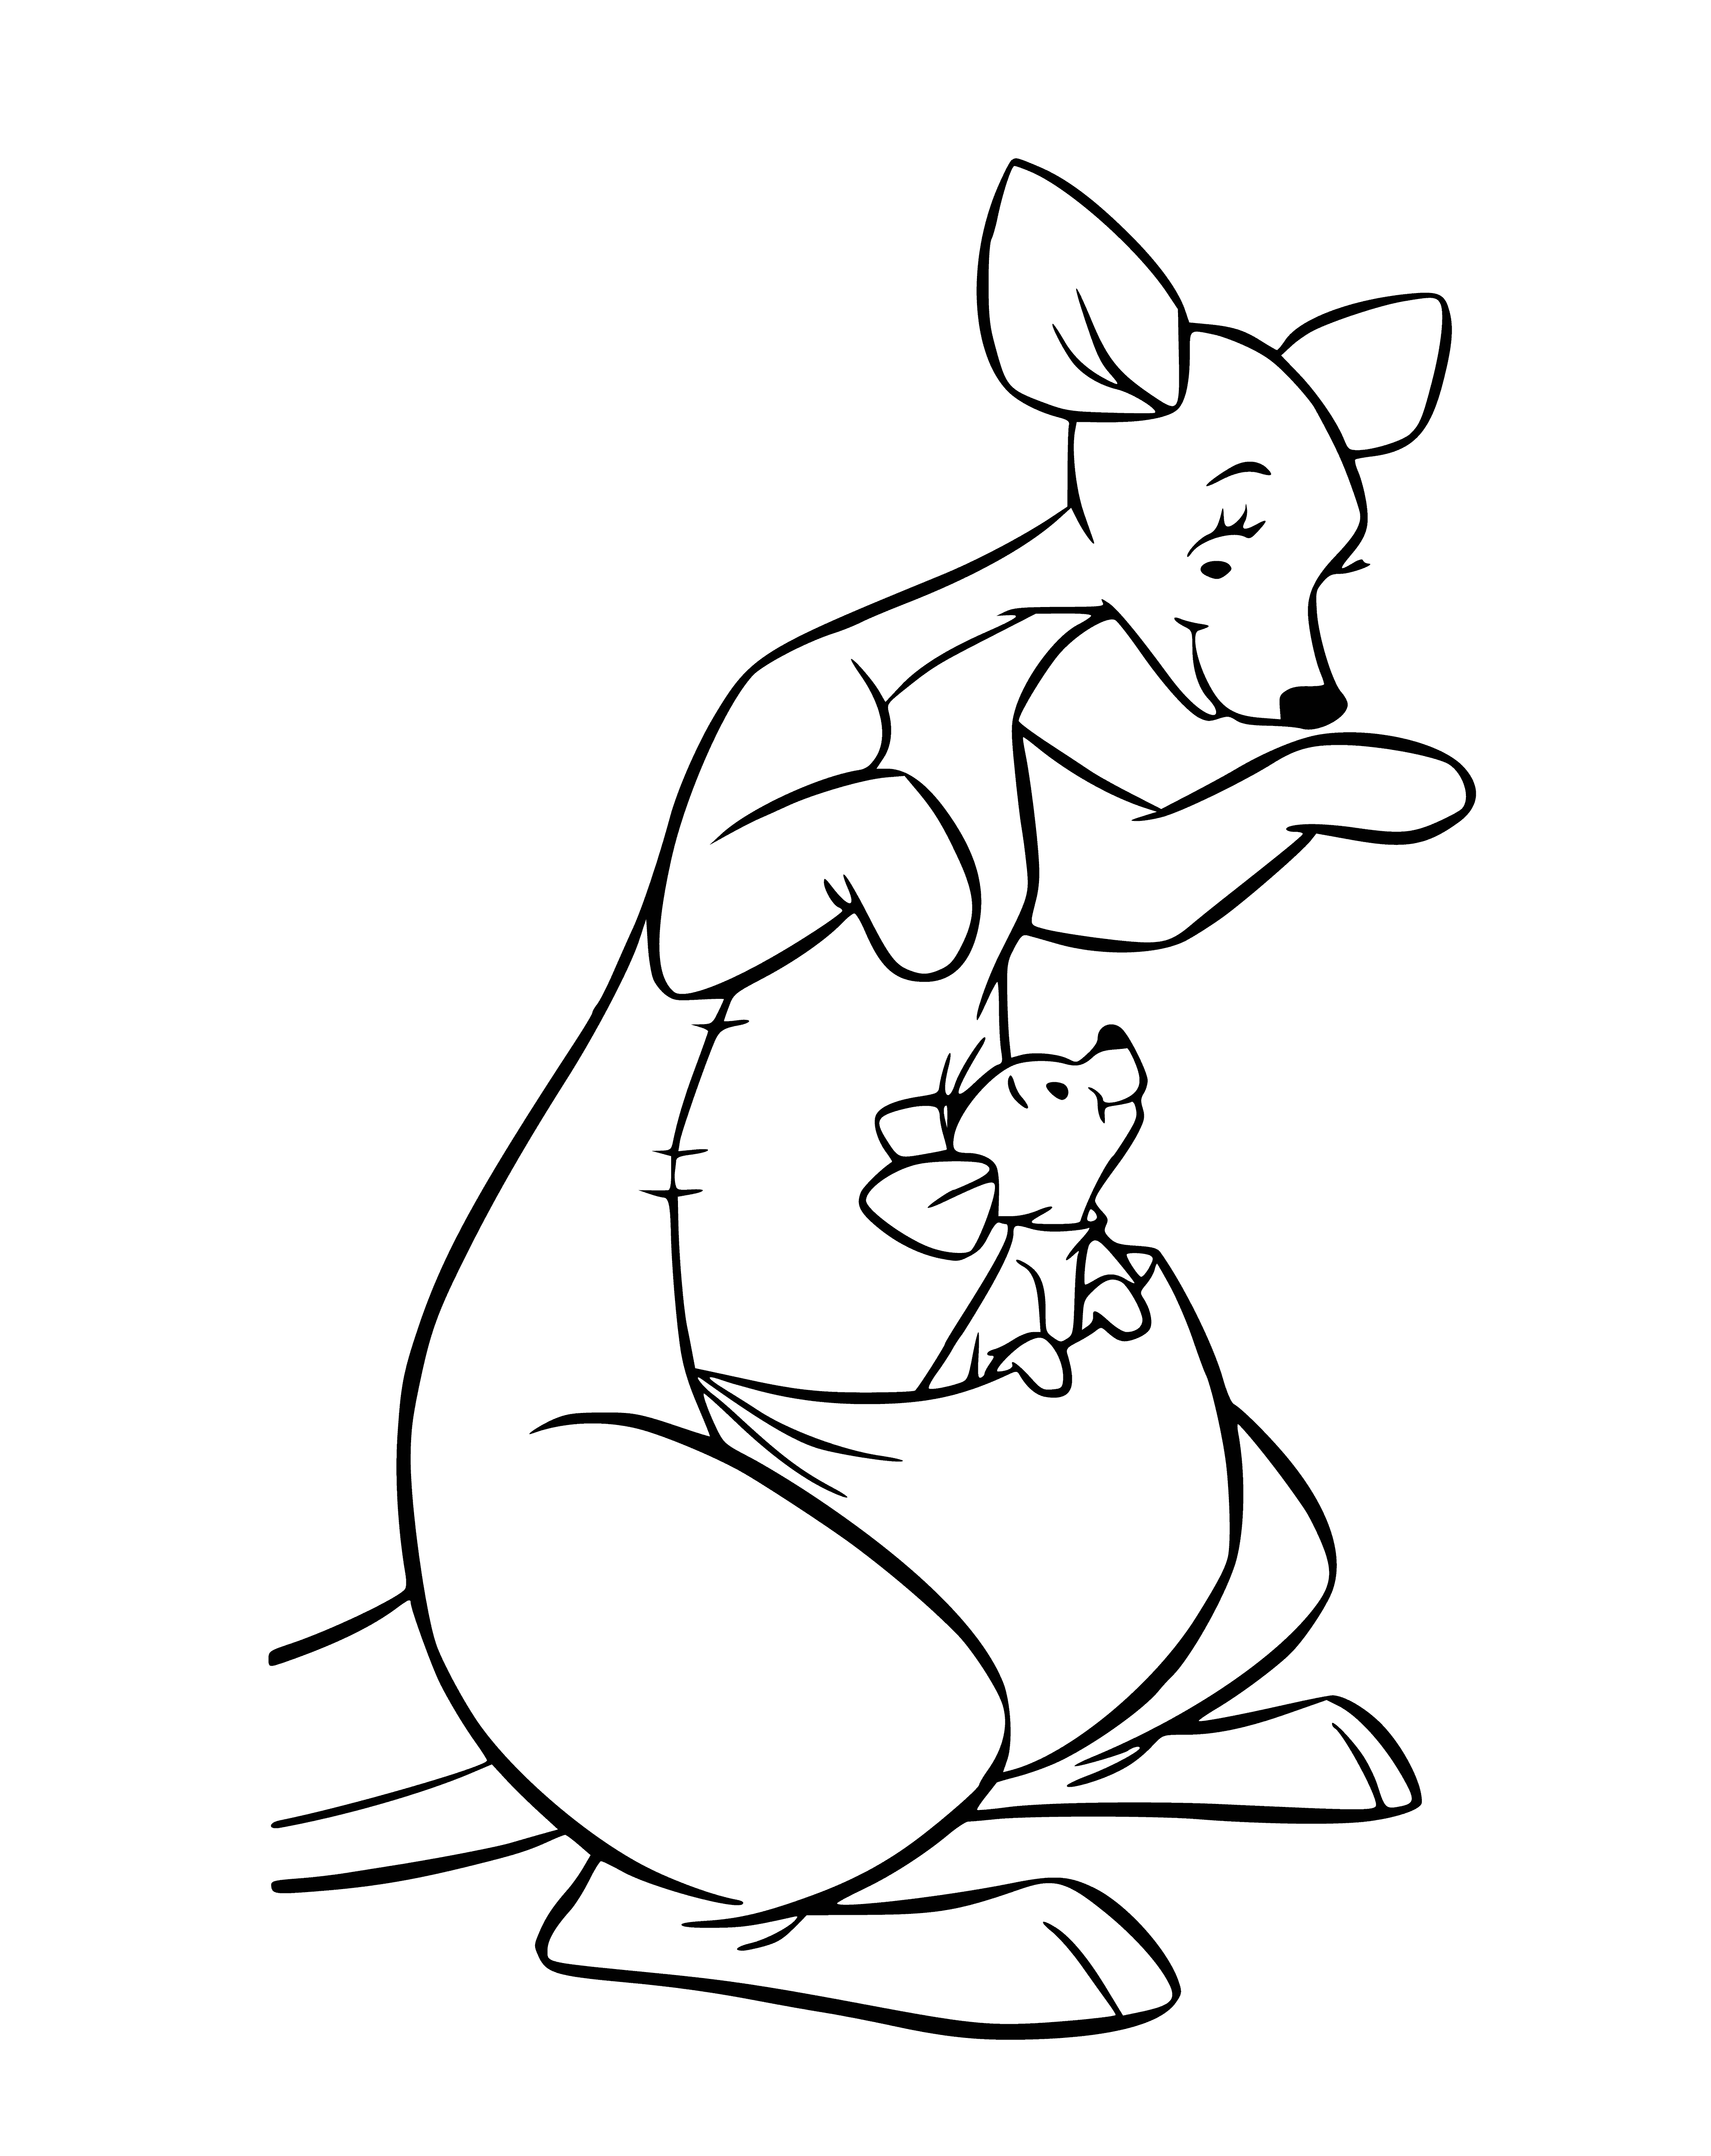 coloring page: Large yellow bear with honey pot & spoon stands before small brown bear with honeycomb.